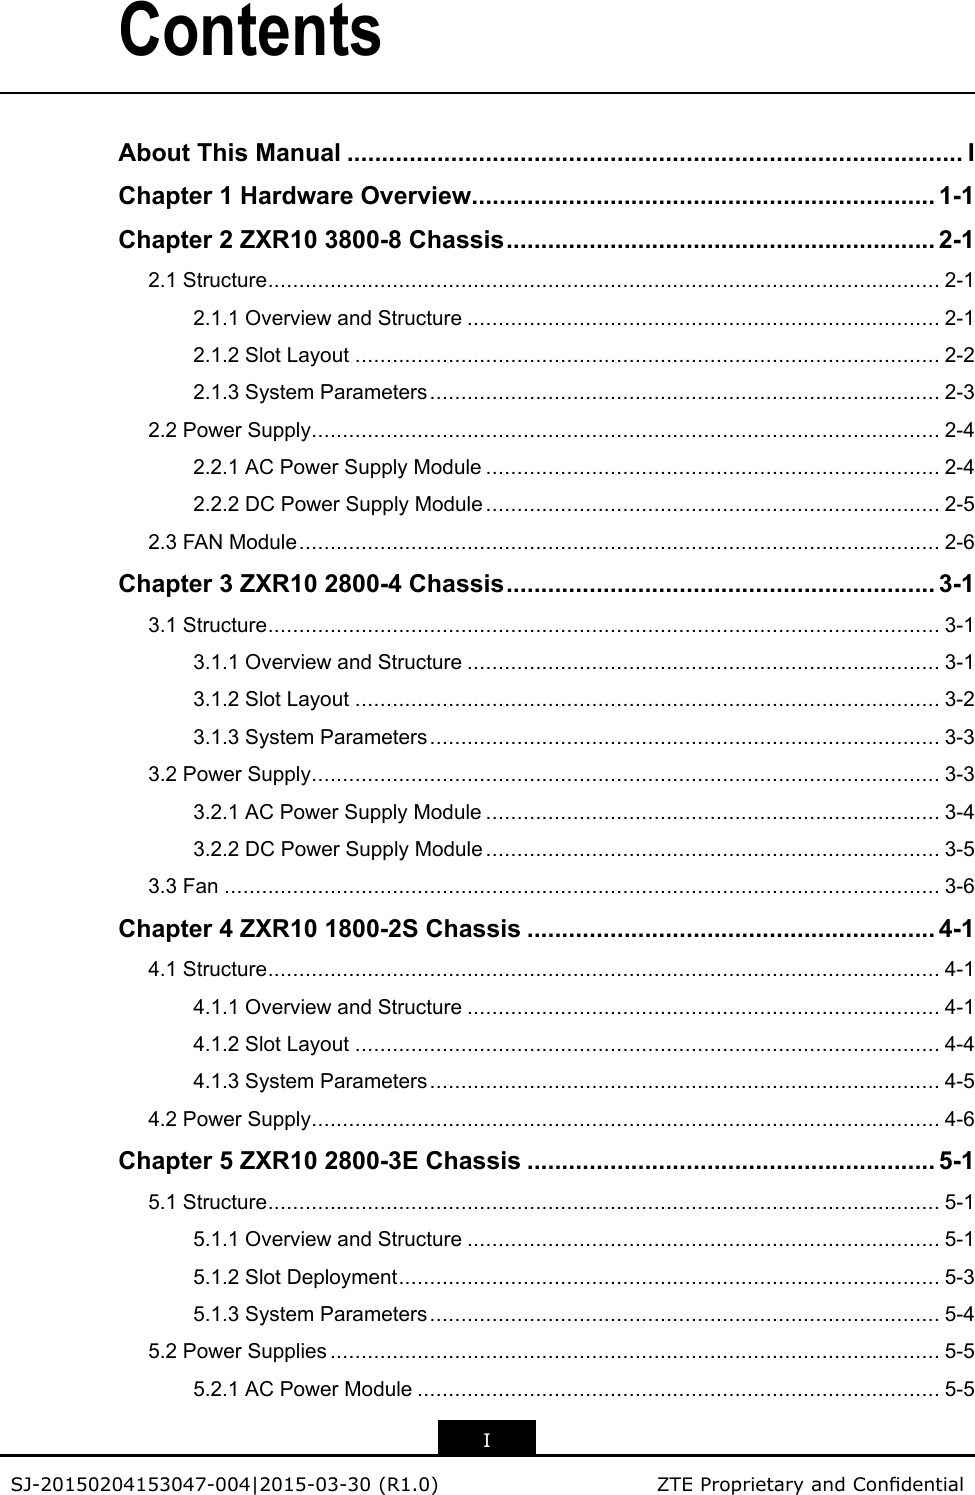 ContentsAboutThisManual.........................................................................................IChapter1HardwareOverview...................................................................1-1Chapter2ZXR103800-8Chassis..............................................................2-12.1Structure............................................................................................................2-12.1.1OverviewandStructure............................................................................2-12.1.2SlotLayout..............................................................................................2-22.1.3SystemParameters..................................................................................2-32.2PowerSupply.....................................................................................................2-42.2.1ACPowerSupplyModule.........................................................................2-42.2.2DCPowerSupplyModule.........................................................................2-52.3FANModule.......................................................................................................2-6Chapter3ZXR102800-4Chassis..............................................................3-13.1Structure............................................................................................................3-13.1.1OverviewandStructure............................................................................3-13.1.2SlotLayout..............................................................................................3-23.1.3SystemParameters..................................................................................3-33.2PowerSupply.....................................................................................................3-33.2.1ACPowerSupplyModule.........................................................................3-43.2.2DCPowerSupplyModule.........................................................................3-53.3Fan...................................................................................................................3-6Chapter4ZXR101800-2SChassis...........................................................4-14.1Structure............................................................................................................4-14.1.1OverviewandStructure............................................................................4-14.1.2SlotLayout..............................................................................................4-44.1.3SystemParameters..................................................................................4-54.2PowerSupply.....................................................................................................4-6Chapter5ZXR102800-3EChassis...........................................................5-15.1Structure............................................................................................................5-15.1.1OverviewandStructure............................................................................5-15.1.2SlotDeployment.......................................................................................5-35.1.3SystemParameters..................................................................................5-45.2PowerSupplies..................................................................................................5-55.2.1ACPowerModule....................................................................................5-5ISJ-20150204153047-004|2015-03-30(R1.0)ZTEProprietaryandCondential